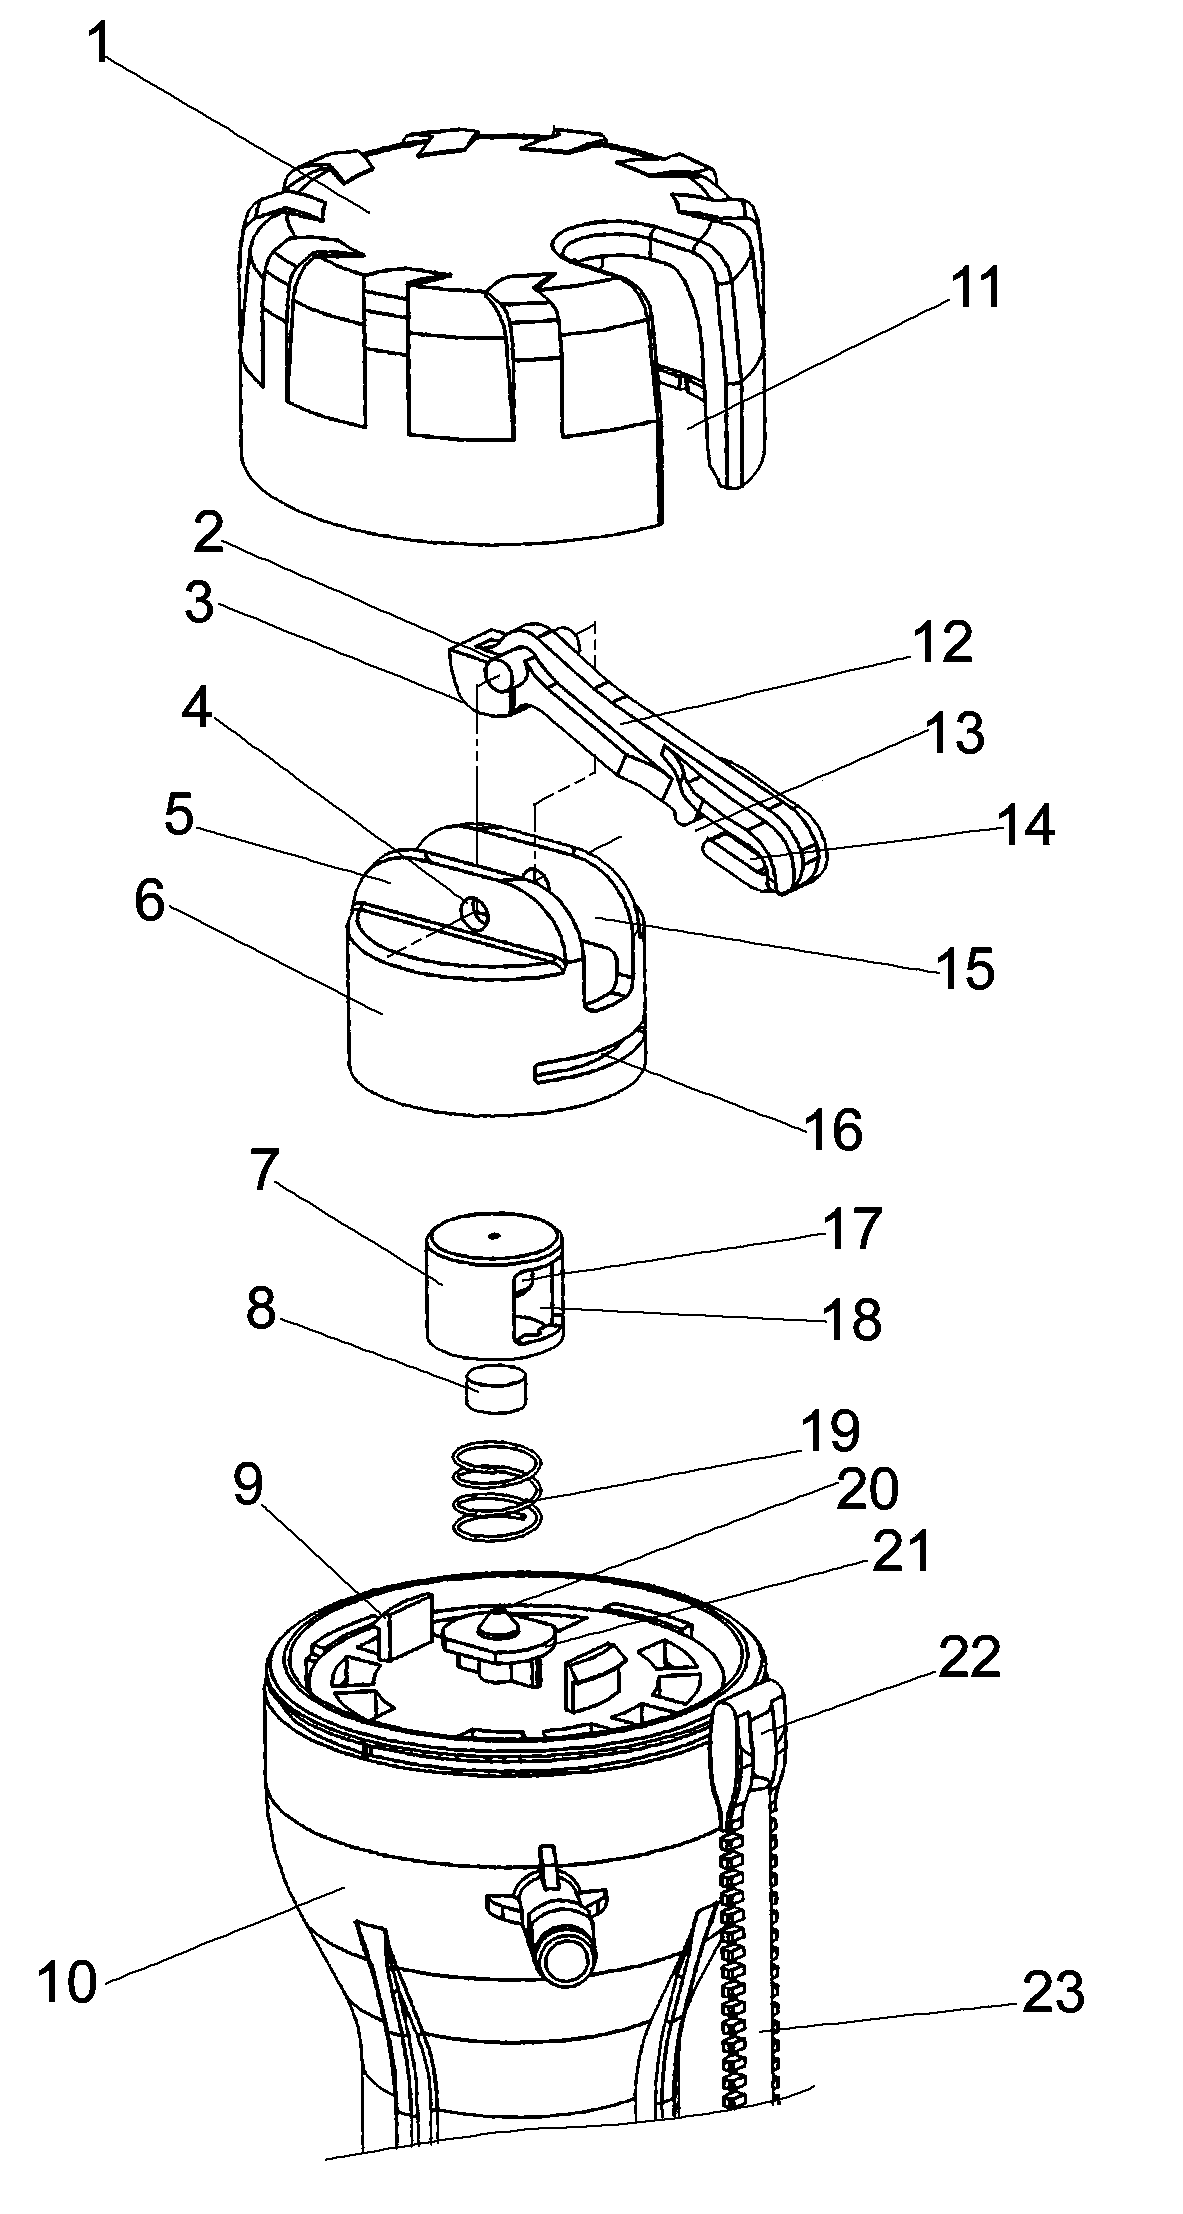 Water stop structure for water inlet device of toilet bowl